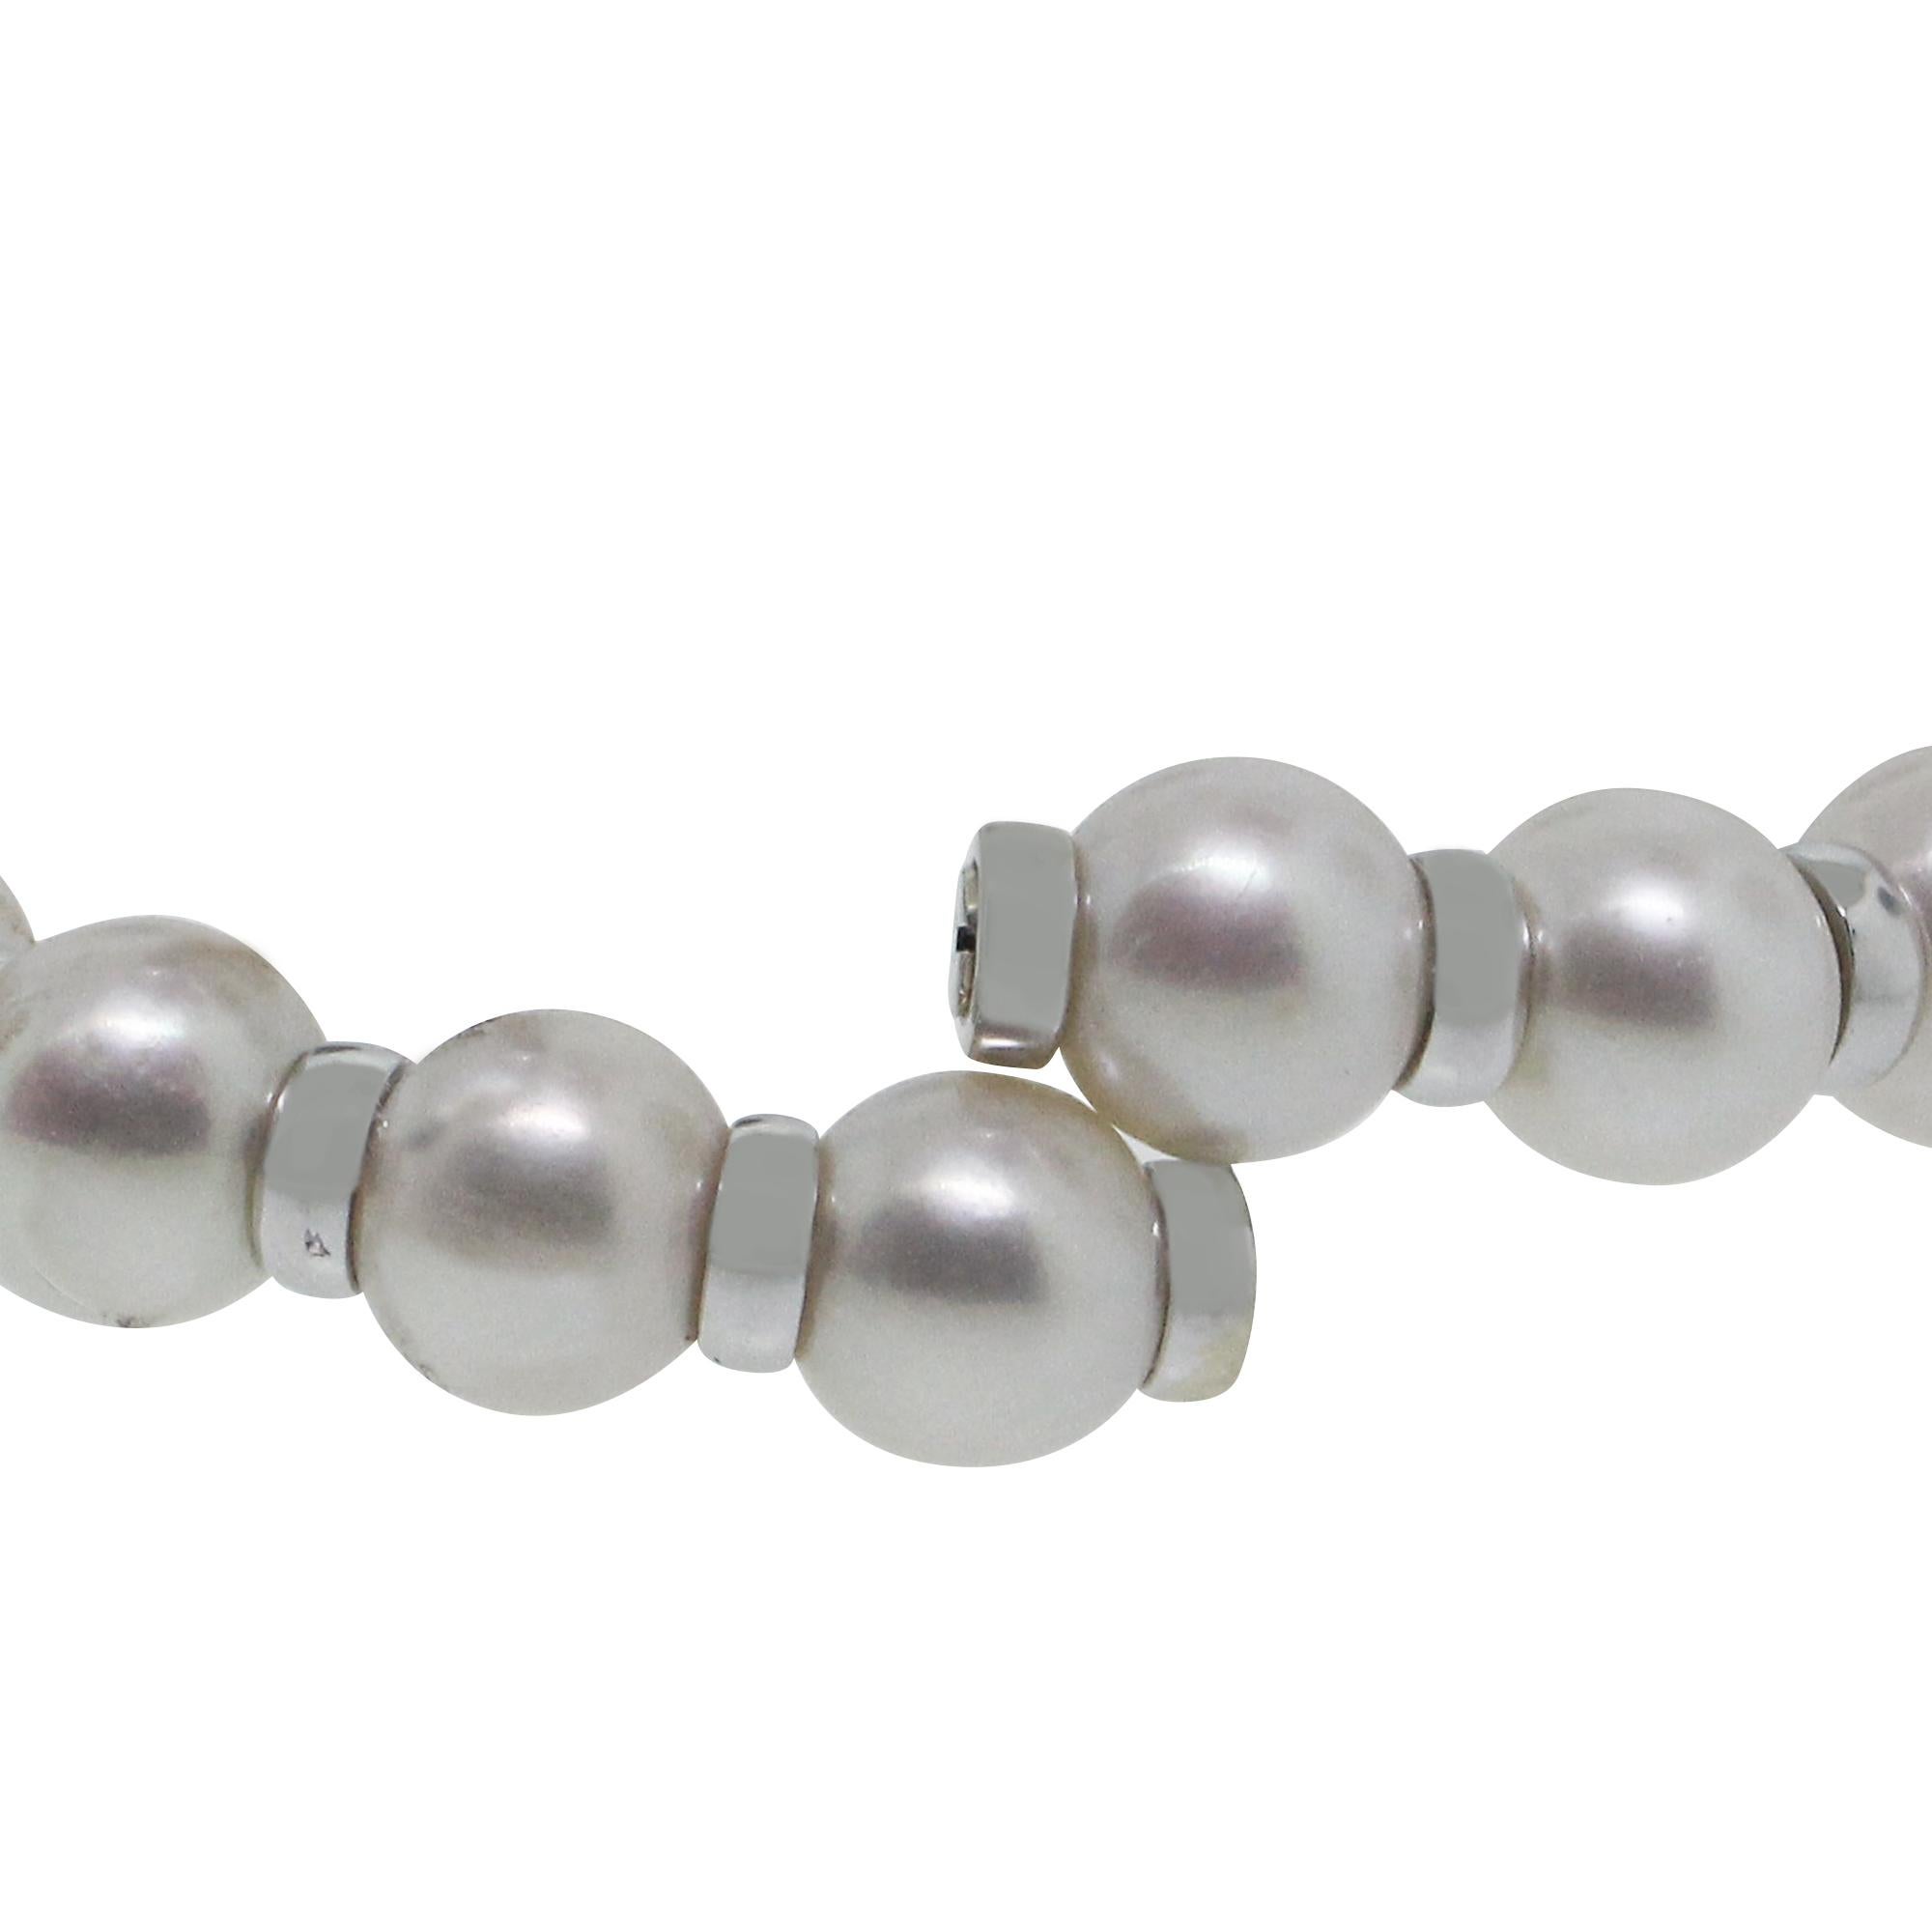 Material: 18k White Gold
Diamond Details: Approximately 0.50ctw round brilliant diamonds. Diamonds are G in color and SI in clarity.
Gemstone Details: Pearls are approximately 9.11mm in diameter
Measurements: 6″
Clasp: No clasp
Total Weight: 32.4g